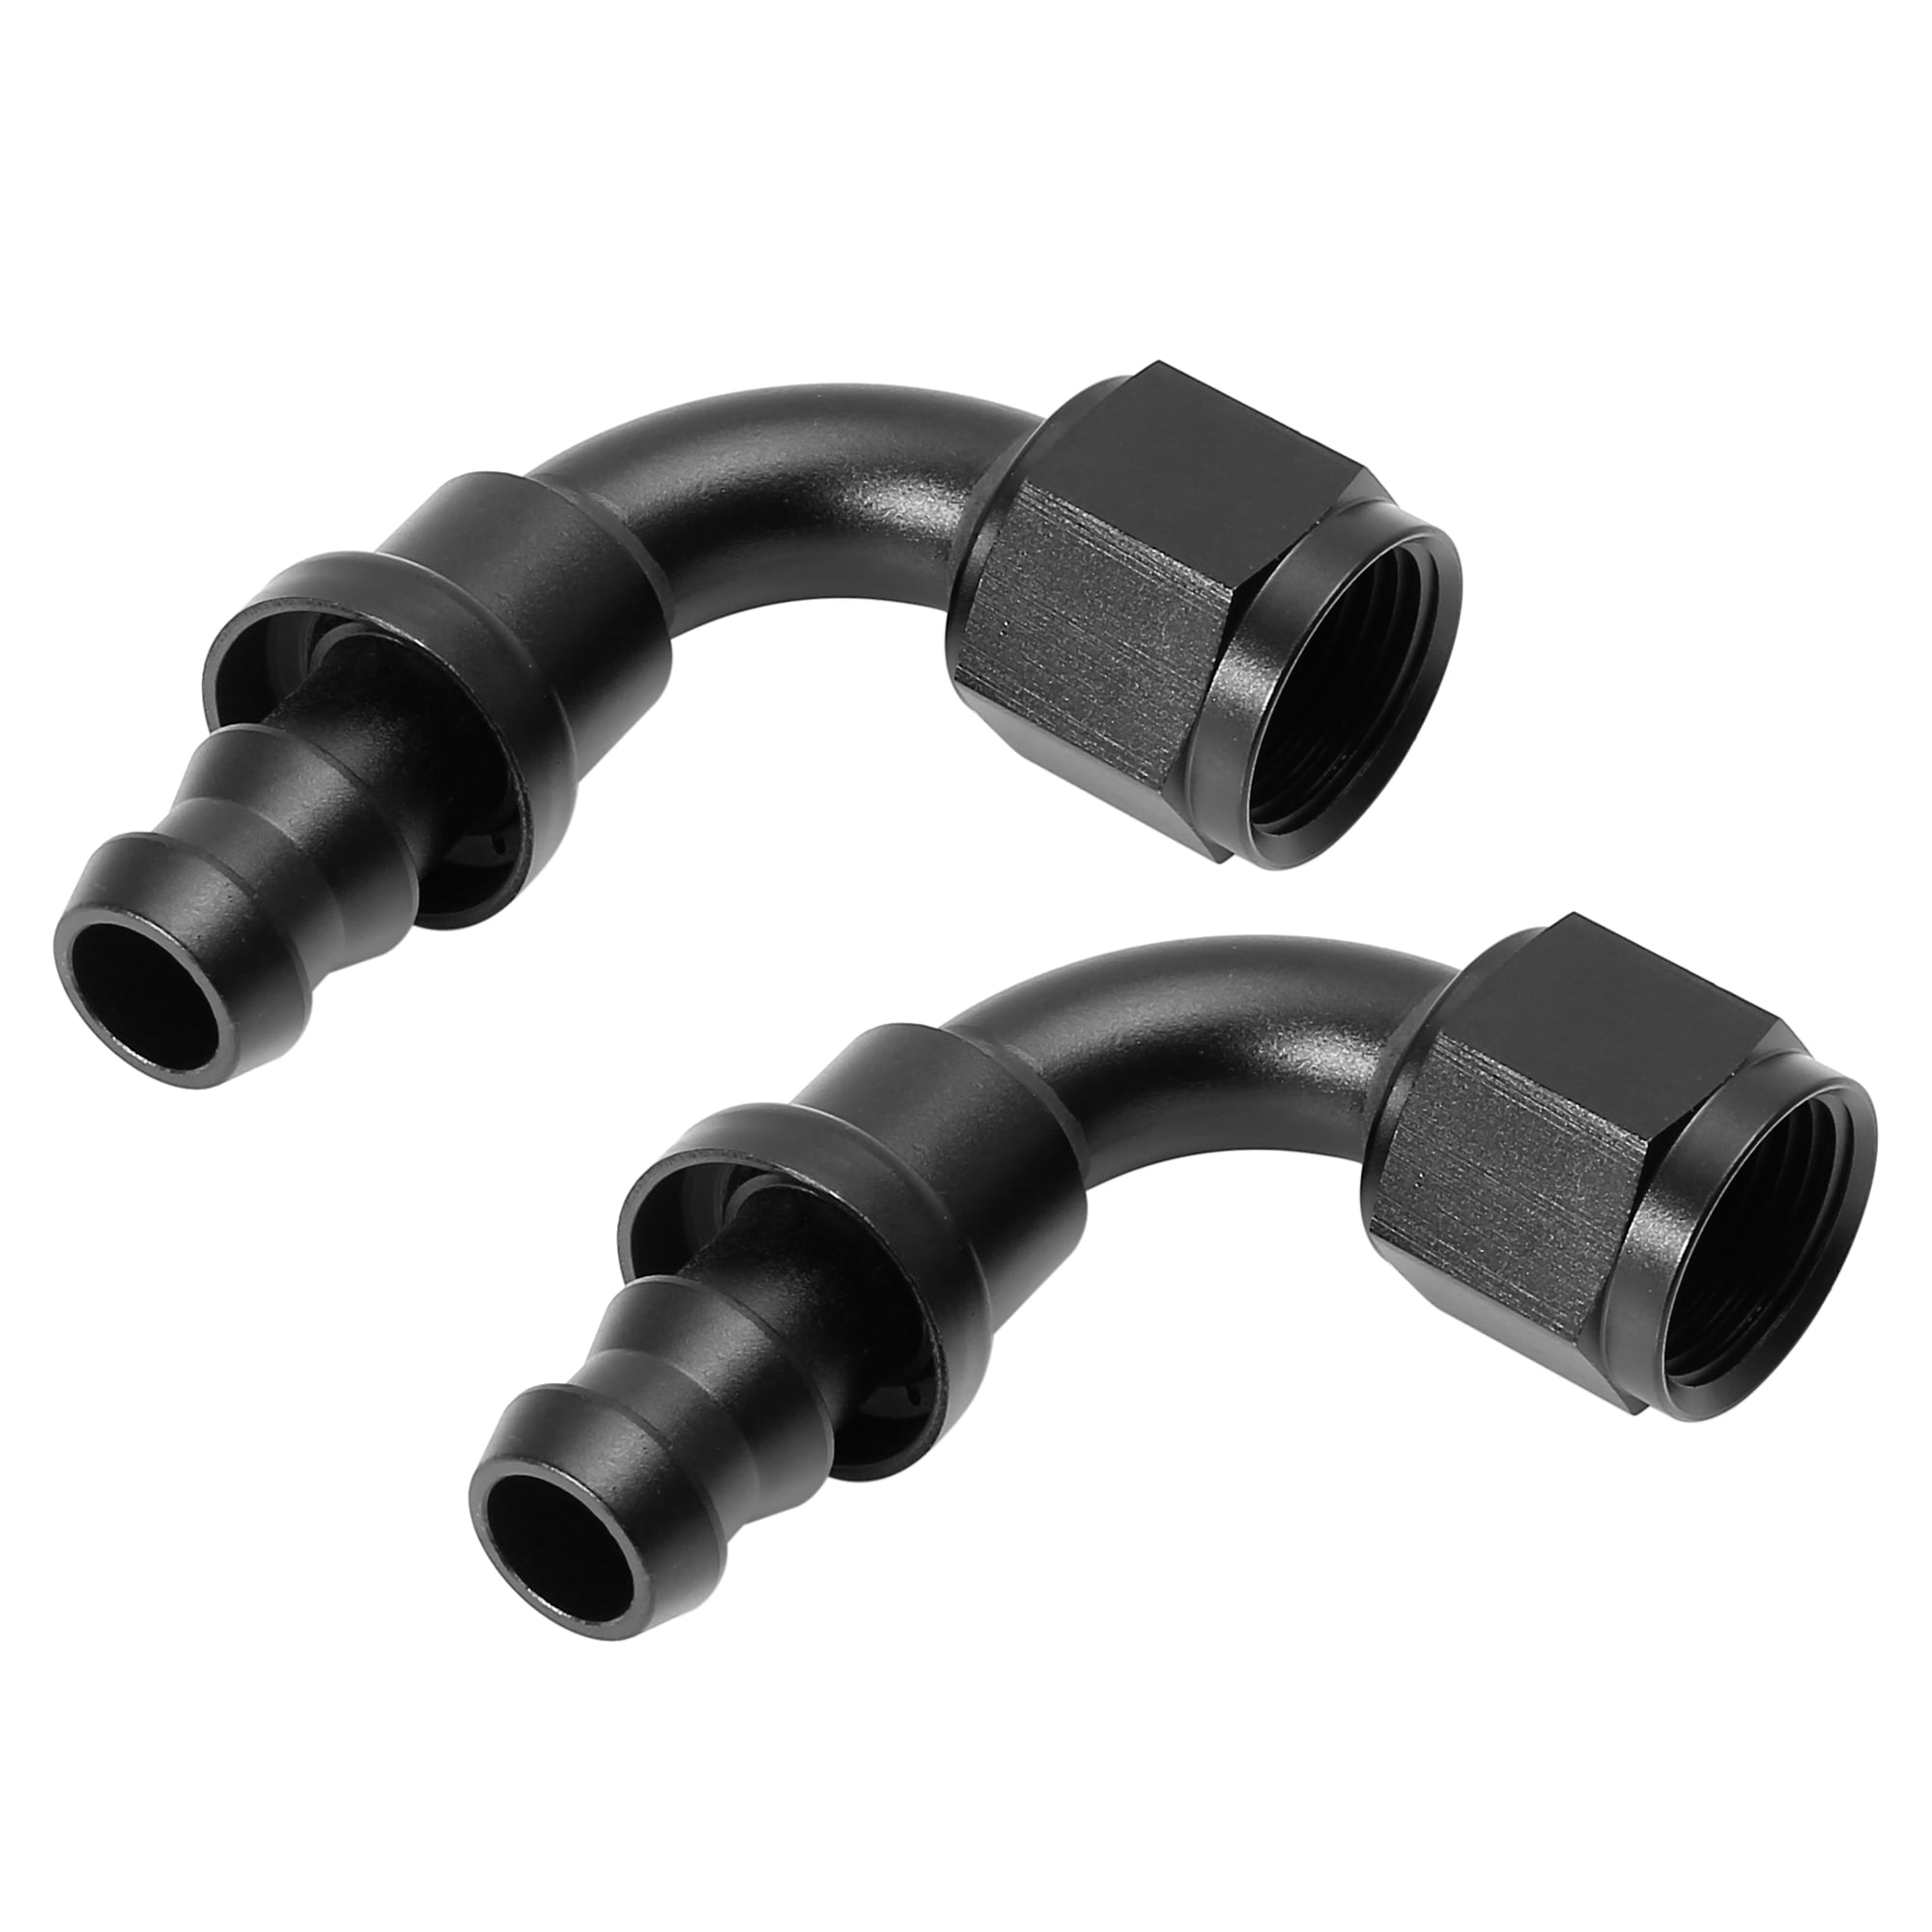 Black AN6 AN-6 90 Degree Push Lock Oil/Fuel/Gas Hose Line End Fitting Adapter 